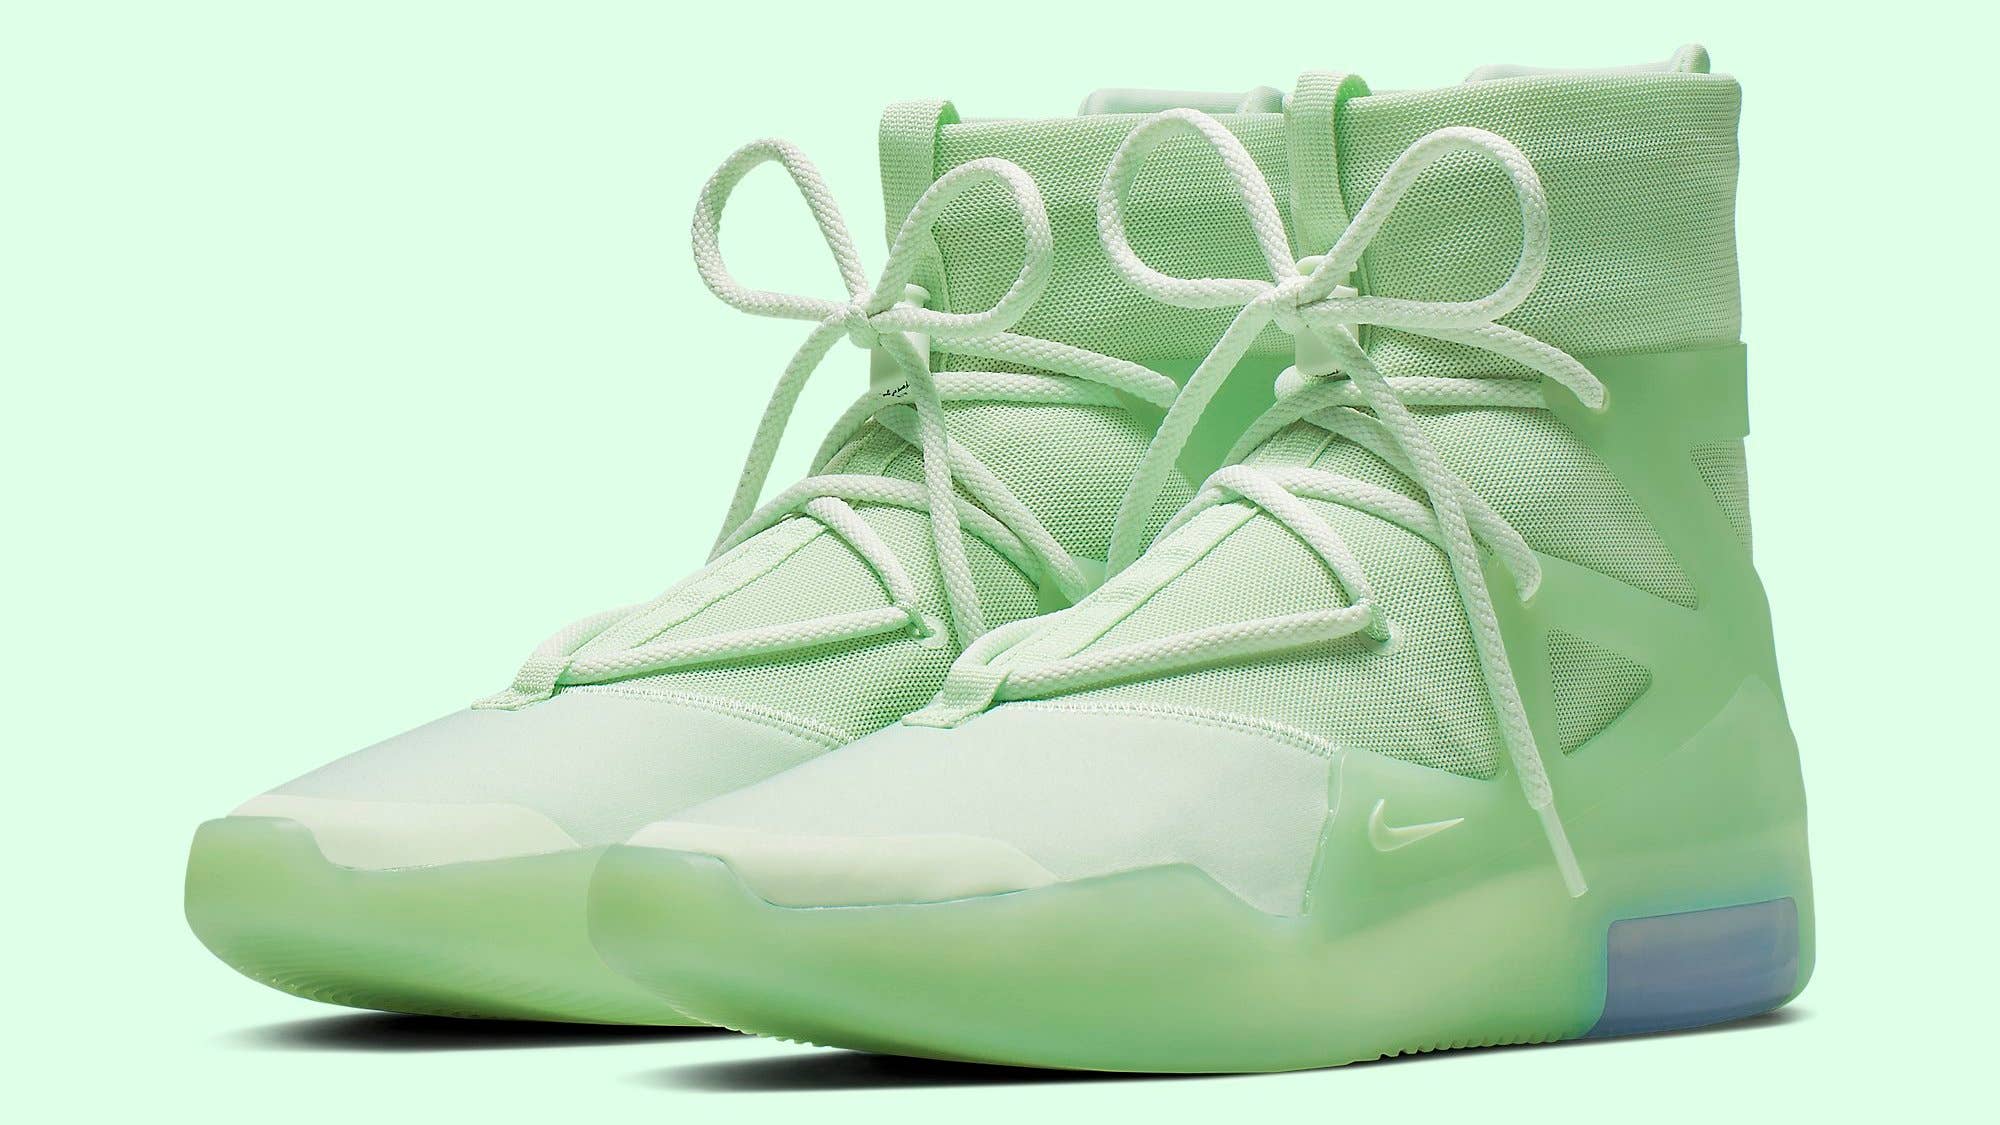 Nike Air Fear of God 1 'Frosted Spruce' AR4237 300 Pair